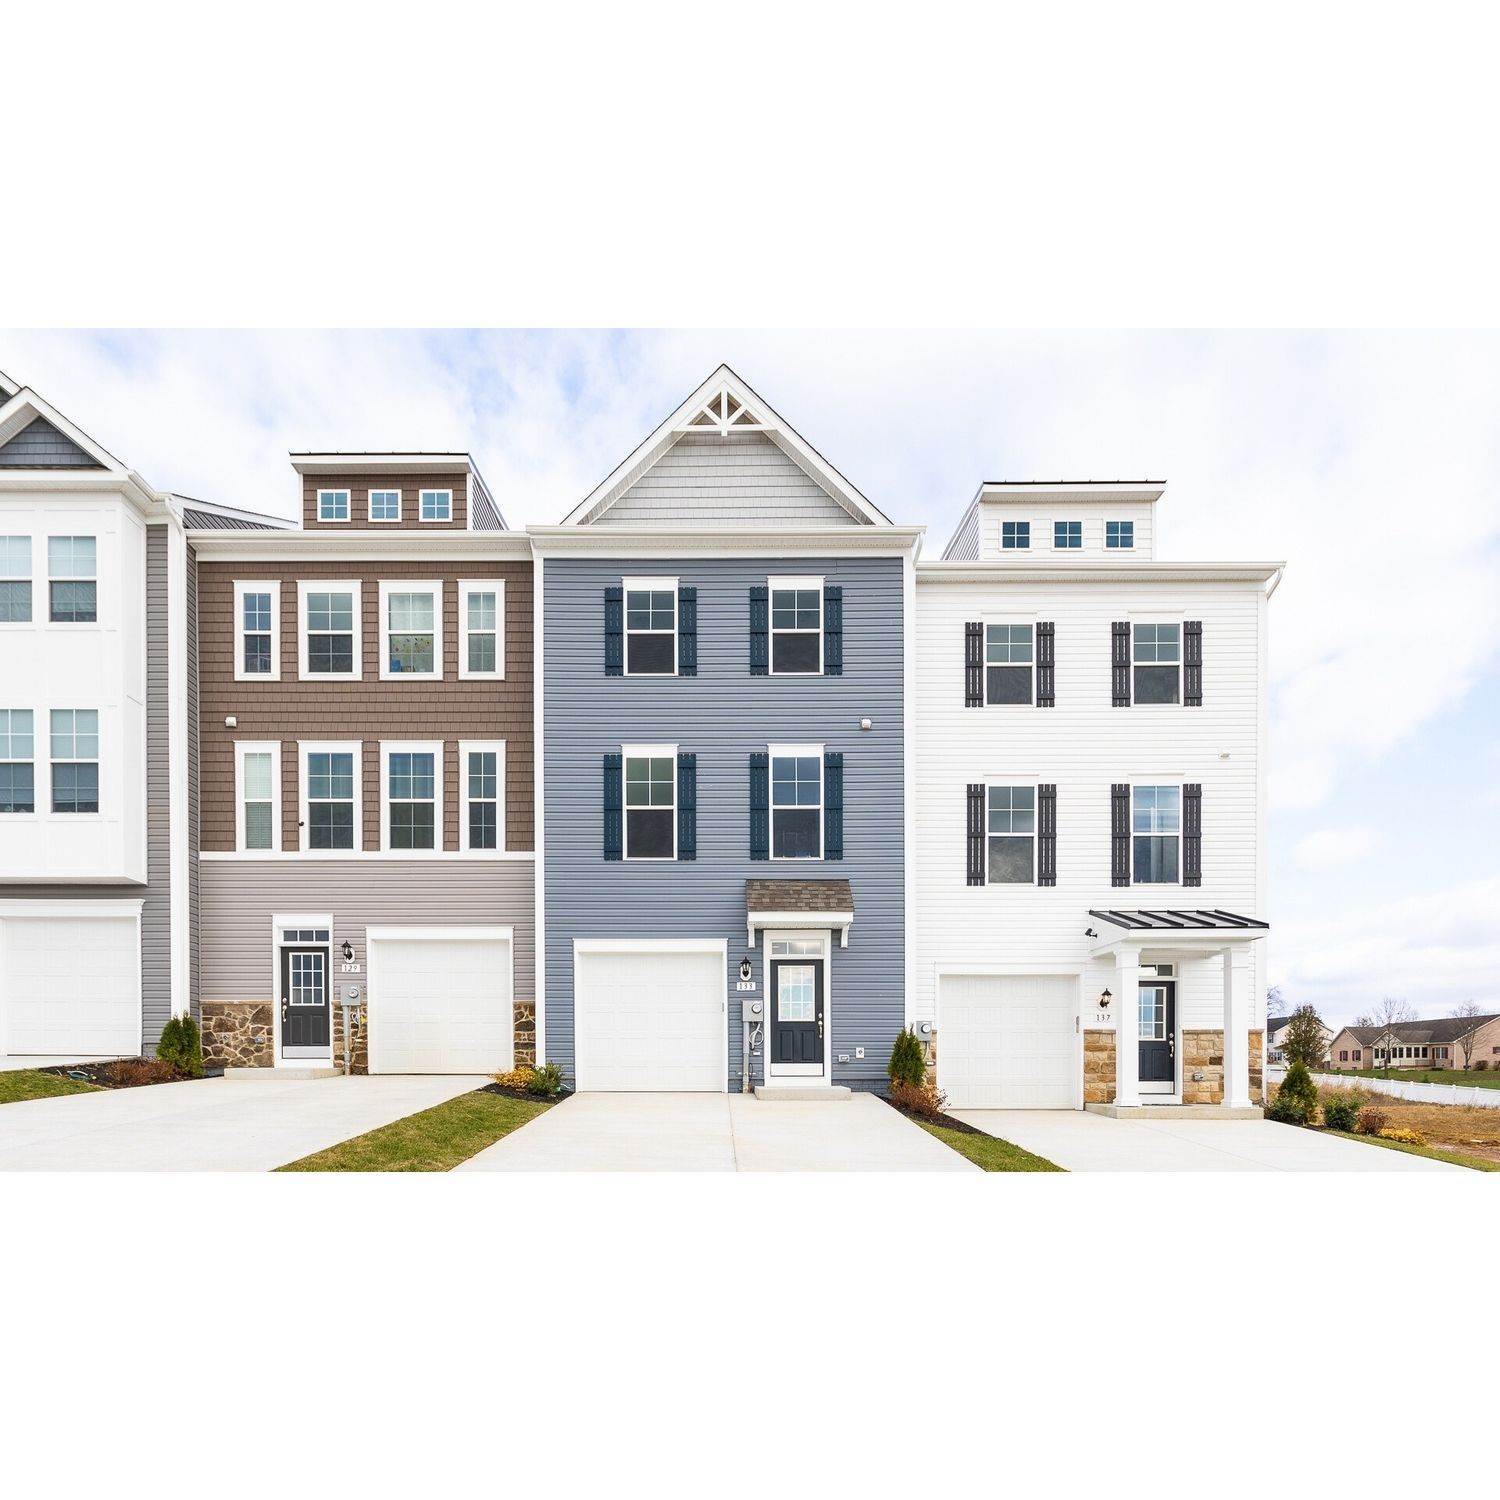 3. 13 Stager Avenue, Falling Waters, WV 25419에 Overlook at Riverside – Townhomes 건물